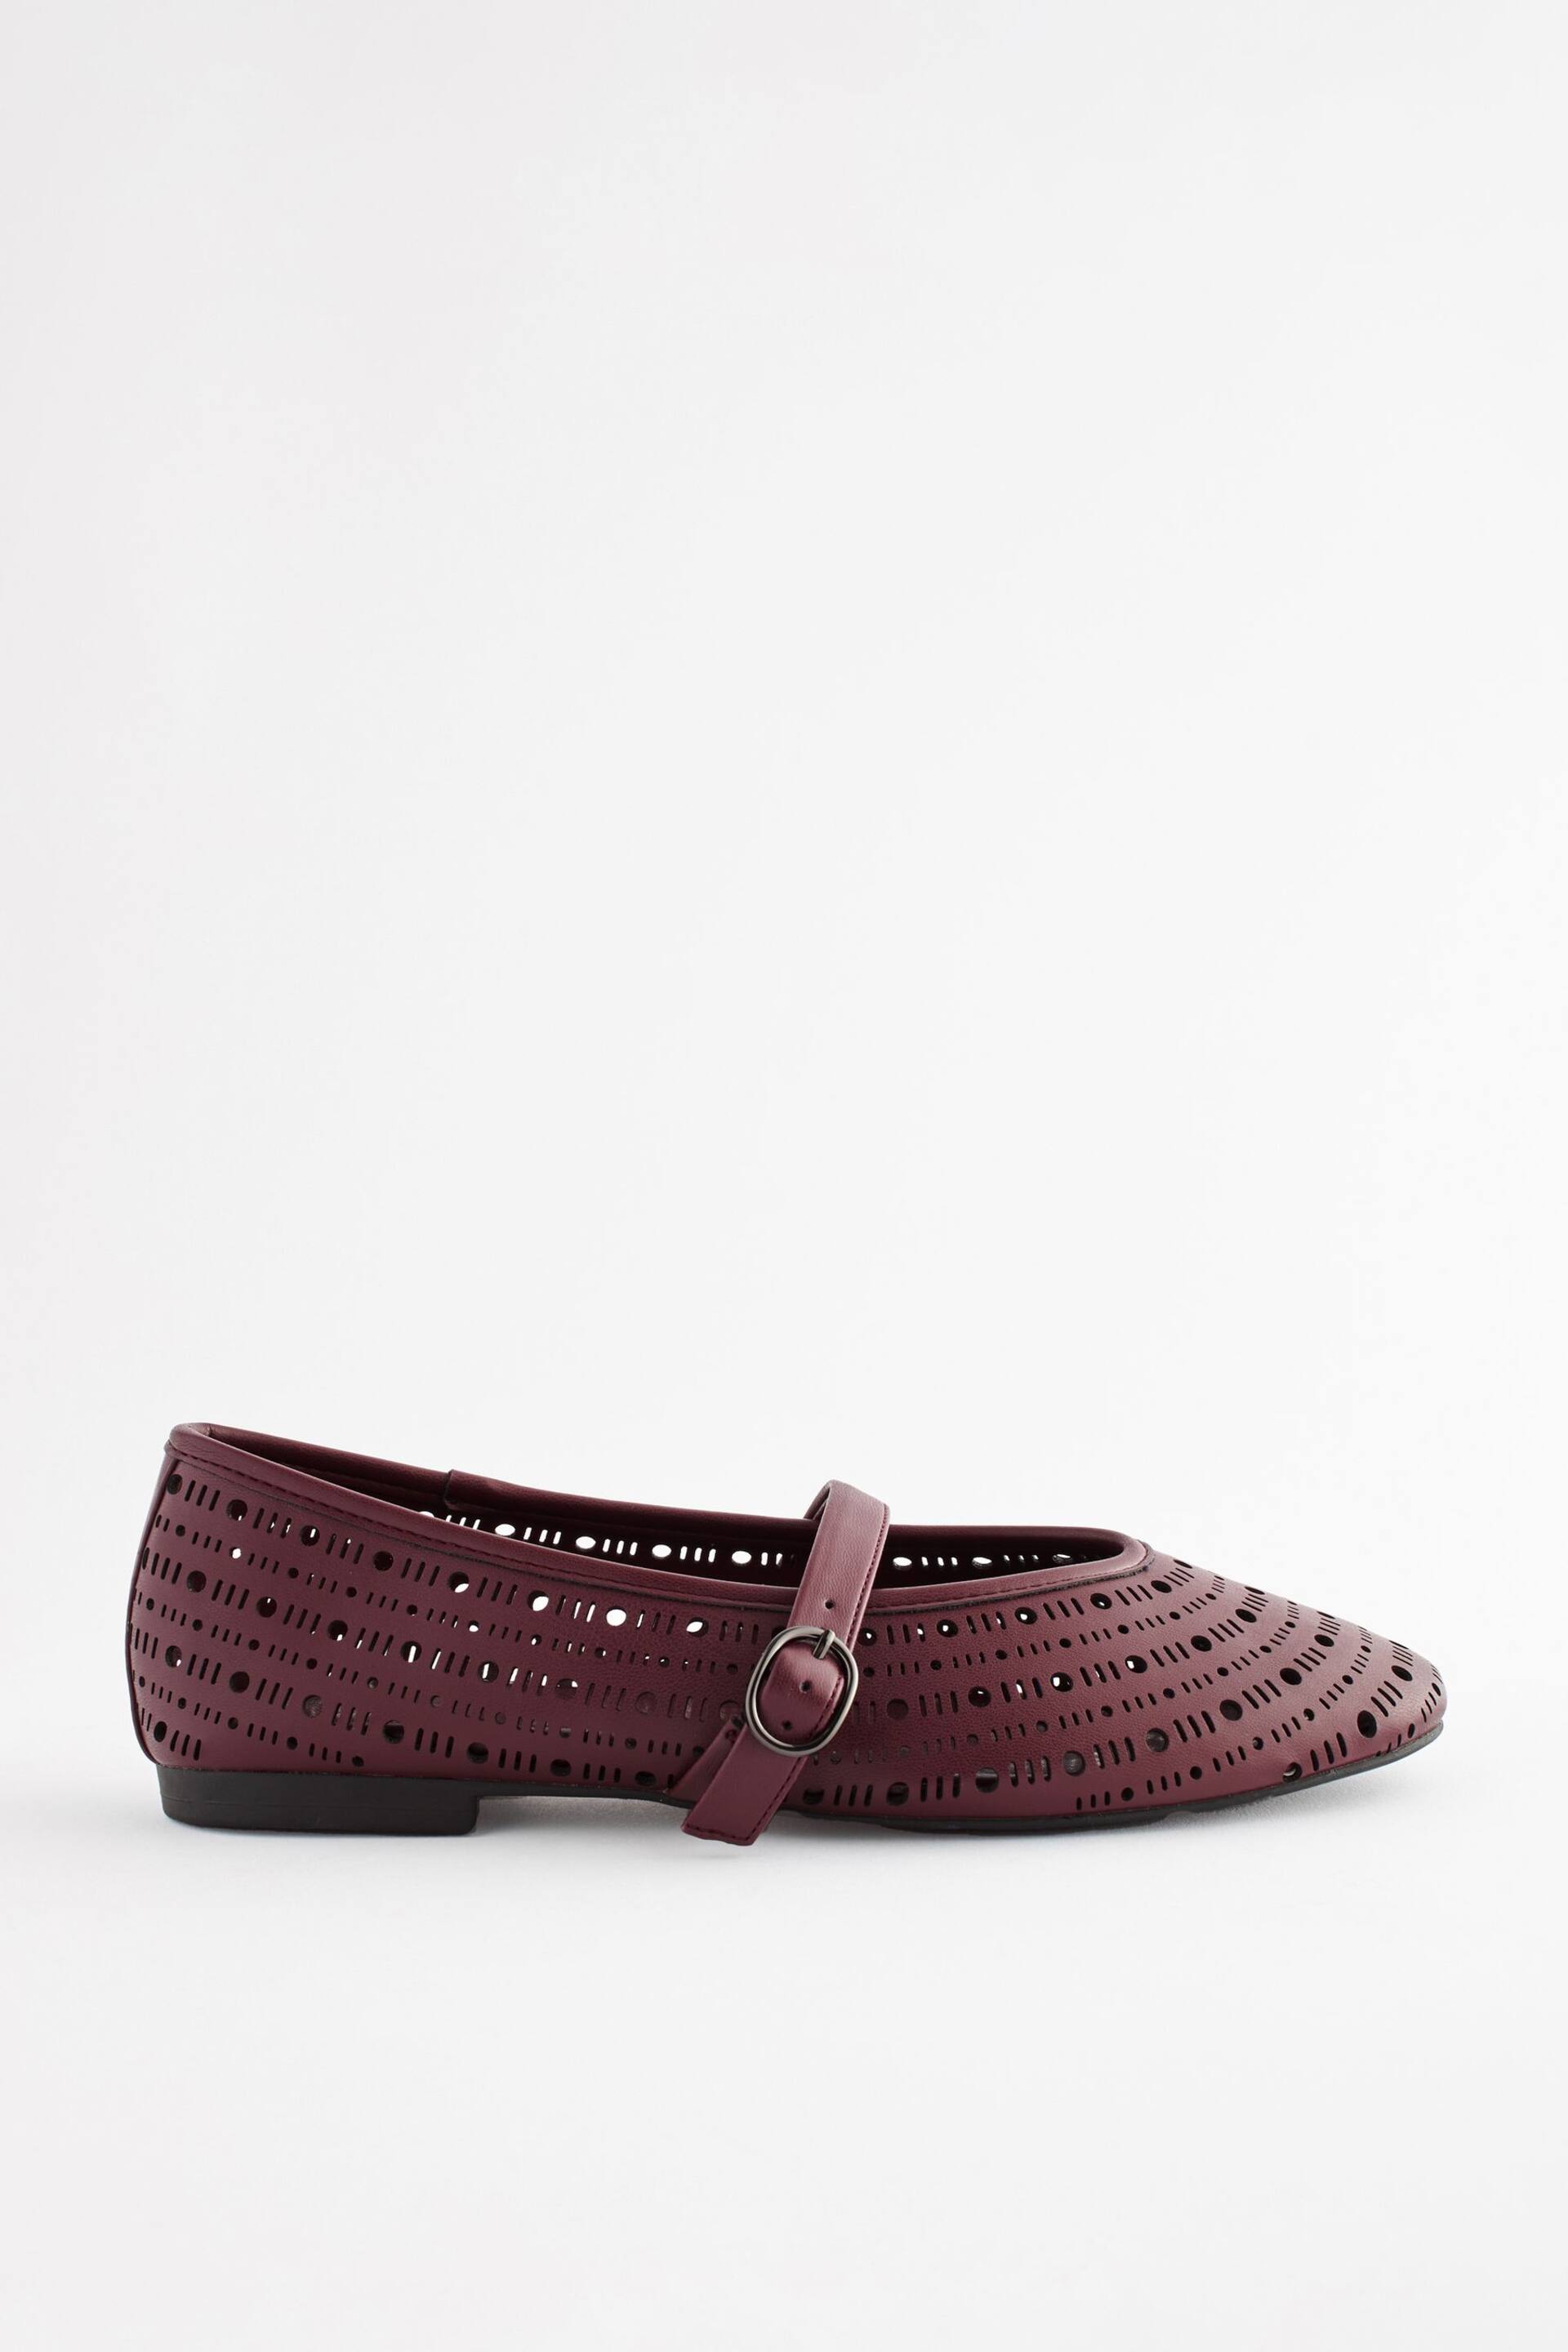 Berry Red Forever Comfort® Lasercut Mary Jane Shoes - Image 1 of 5